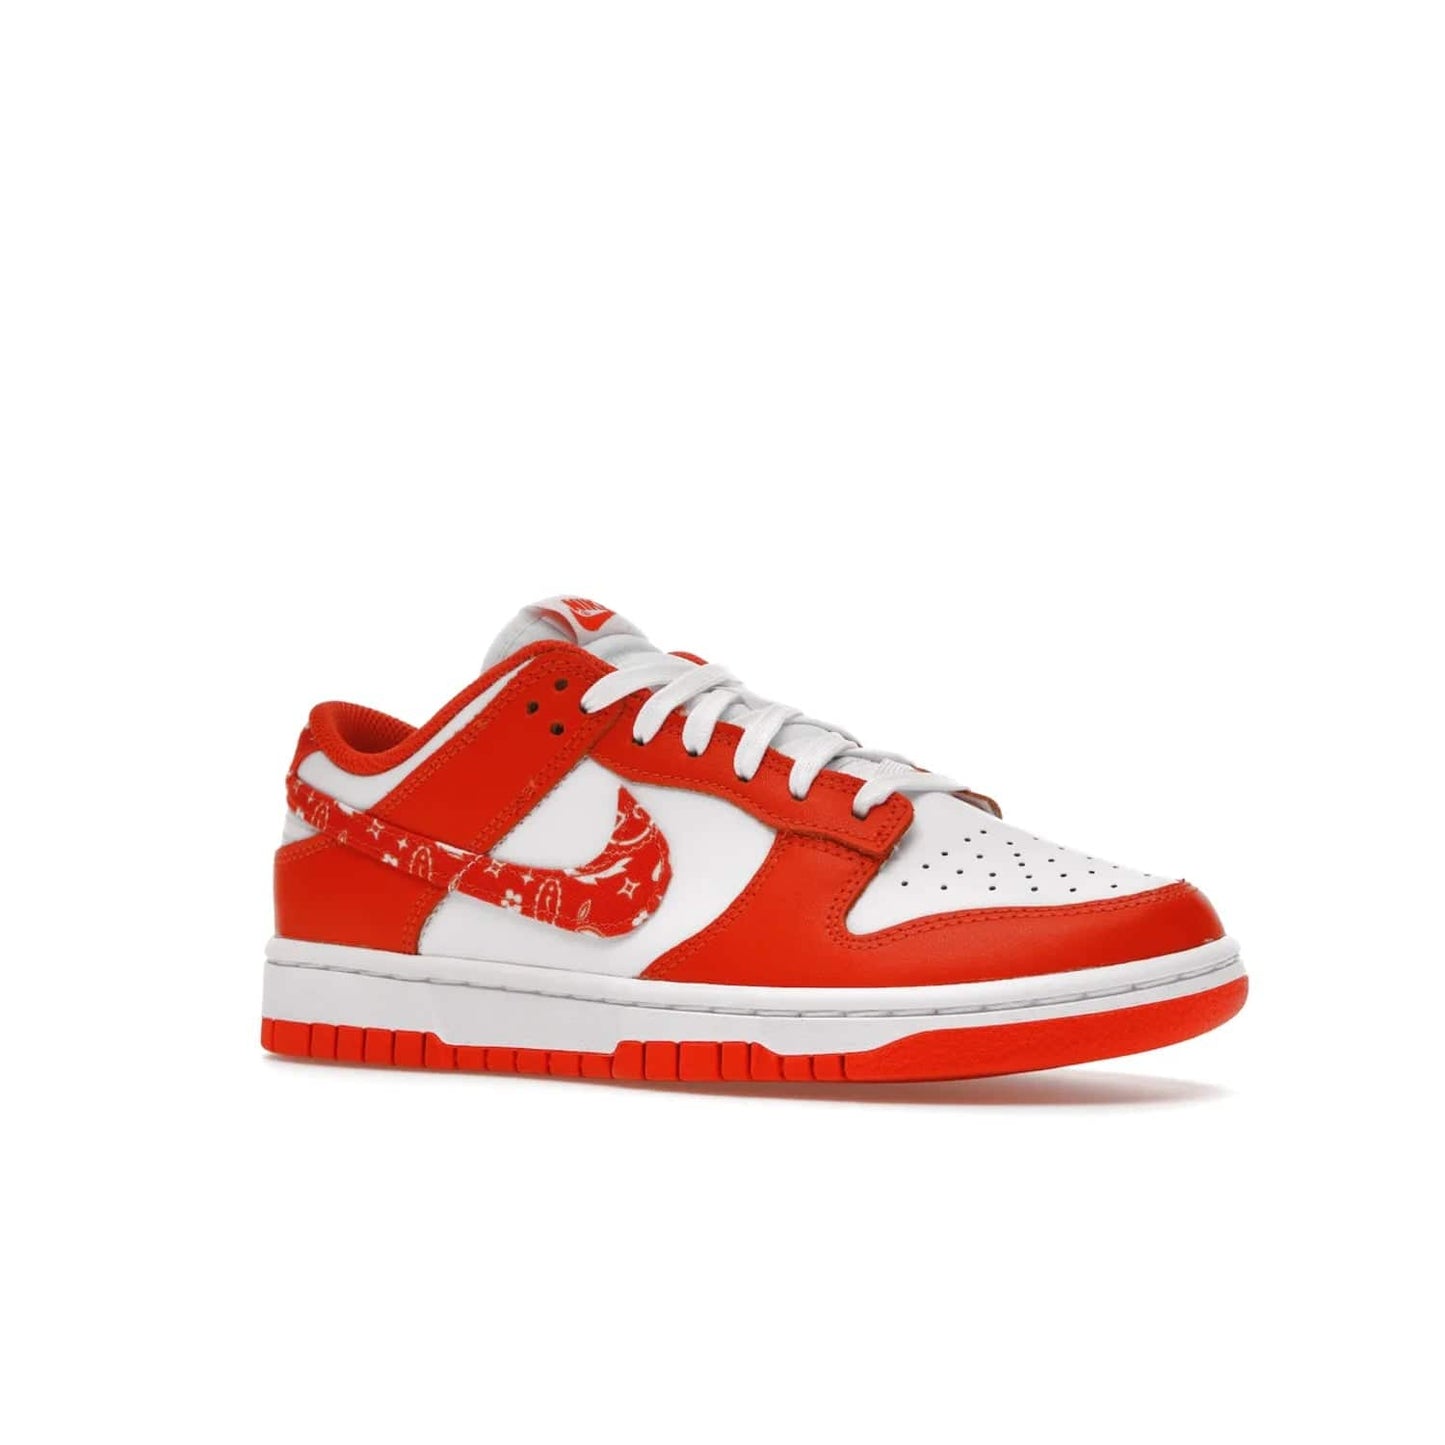 Nike Dunk Low Essential Paisley Pack Orange (Women's) - Image 4 - Only at www.BallersClubKickz.com - Introducing the stunning Nike Dunk Low Essential Paisley Pack Orange (Women's). White leather upper with orange overlays, paisley Swoosh and heel tab. Woven Nike tongue label and Air sole complete the look. Pick up your pair in May 2022.